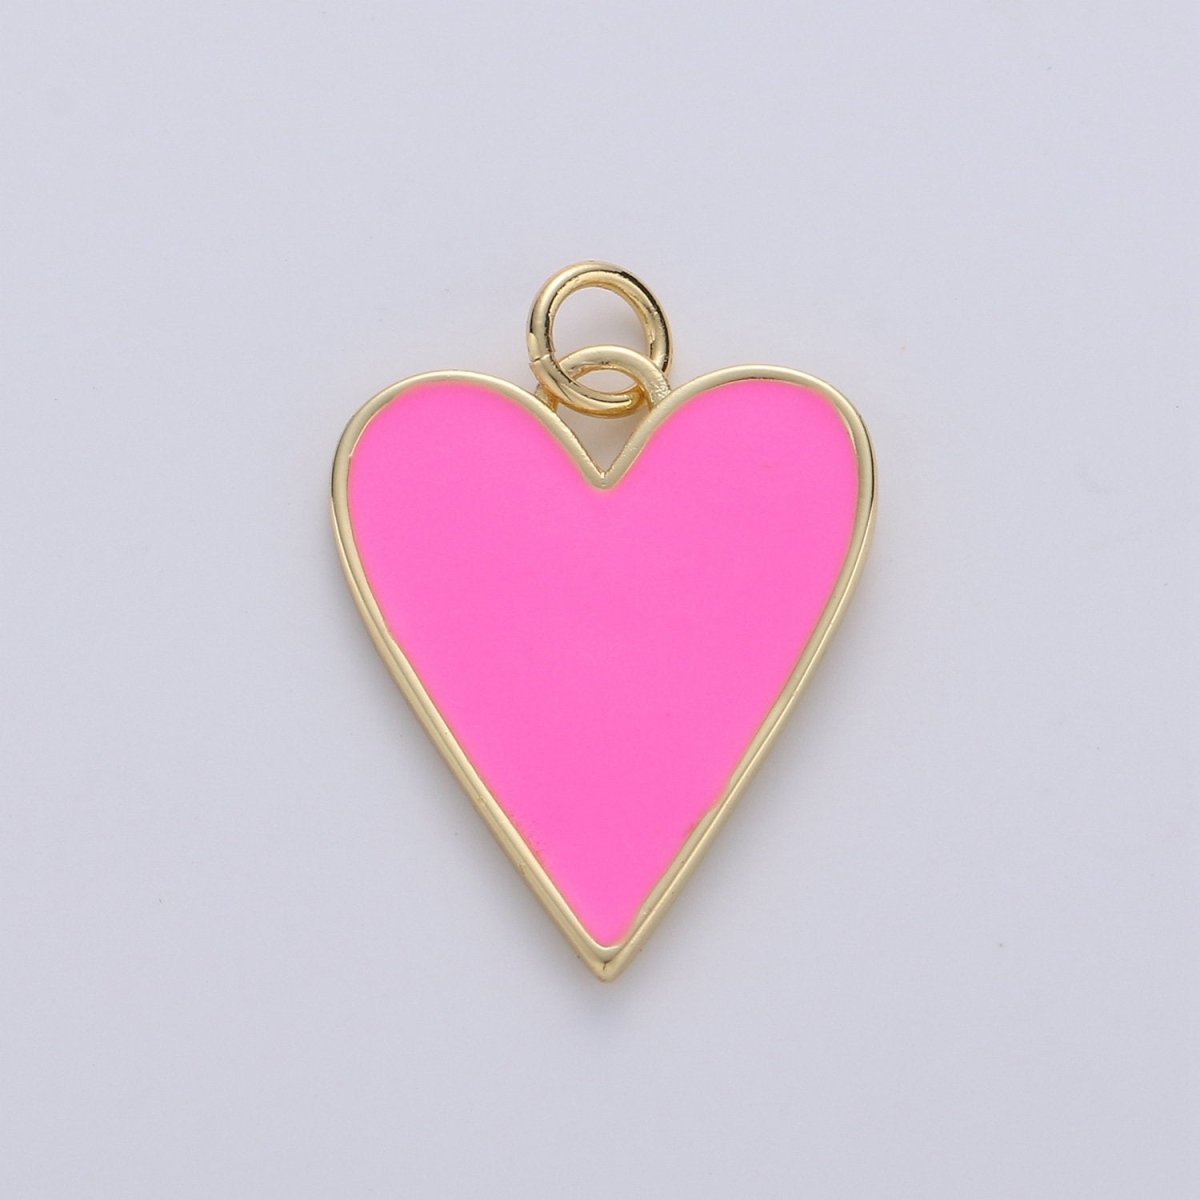 Dainty Red Heart enameled Pink enamel heart pendant, Gold Love charm for Necklace Bracelet Earring Charm Supply Relationship Jewelry D-695 D-696 - DLUXCA